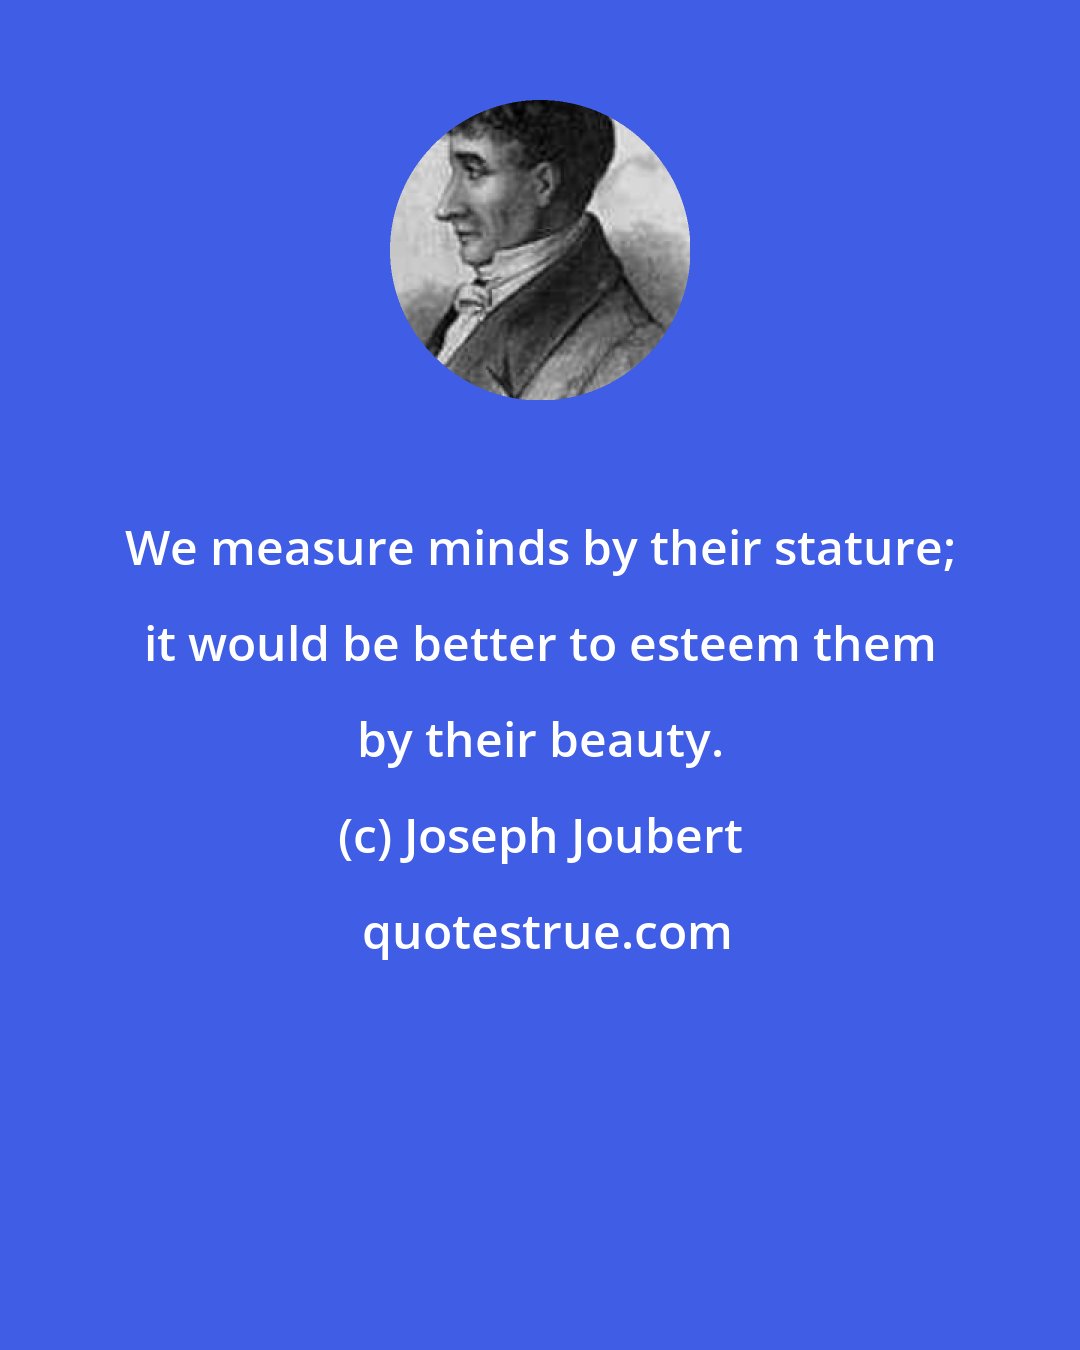 Joseph Joubert: We measure minds by their stature; it would be better to esteem them by their beauty.